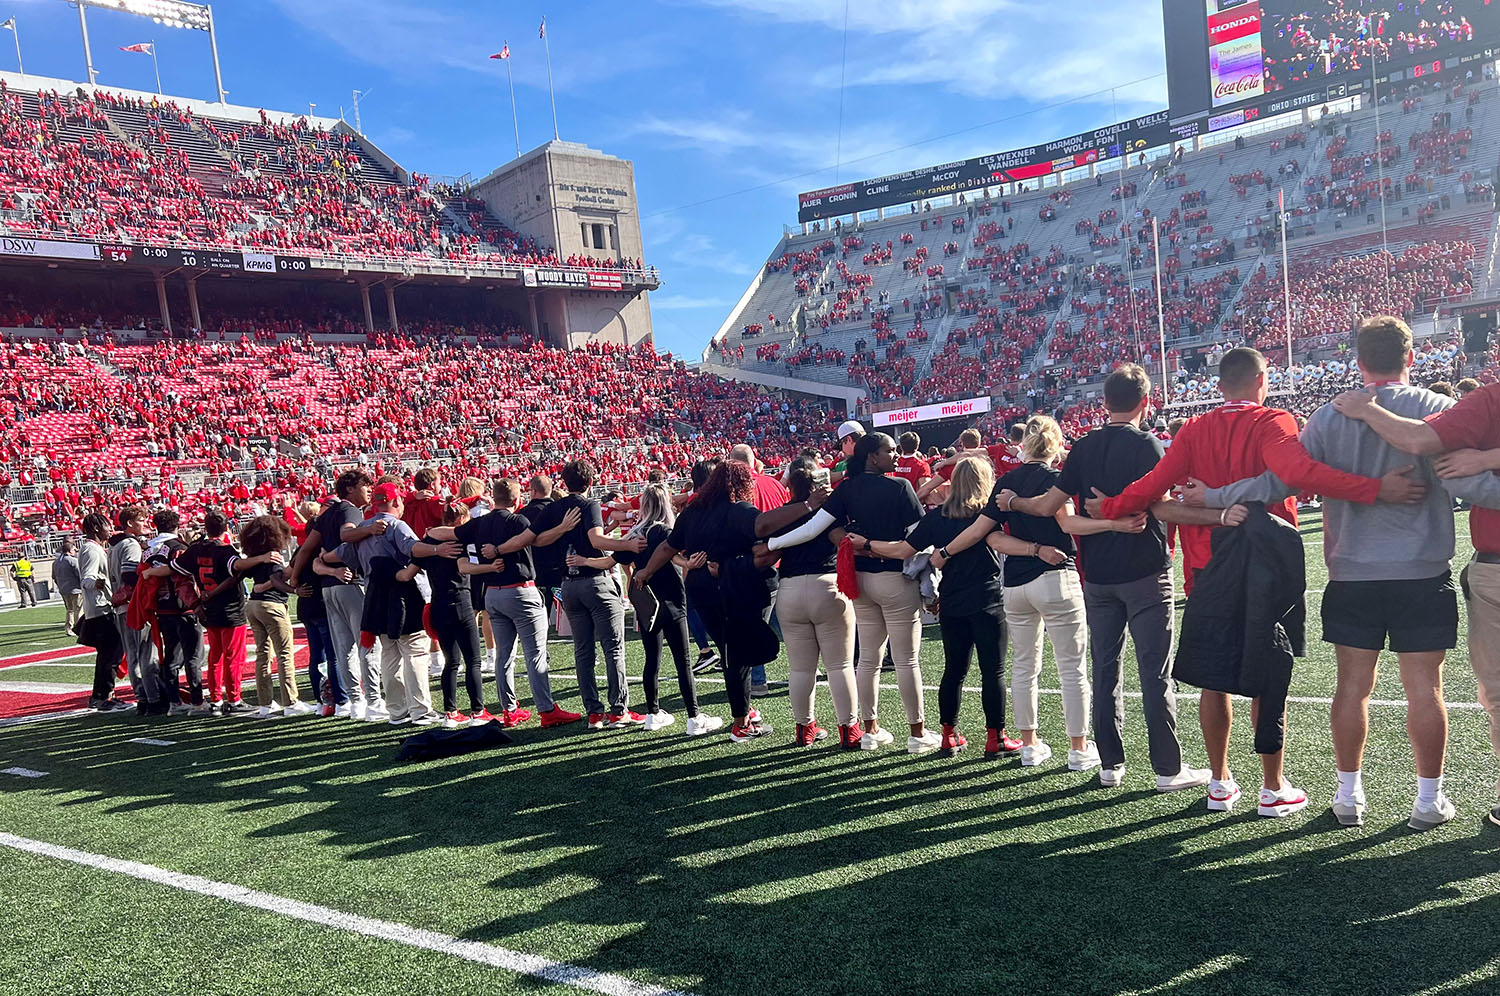 Hosts singing Carmen Ohio on the field of Ohio Stadium after a football game